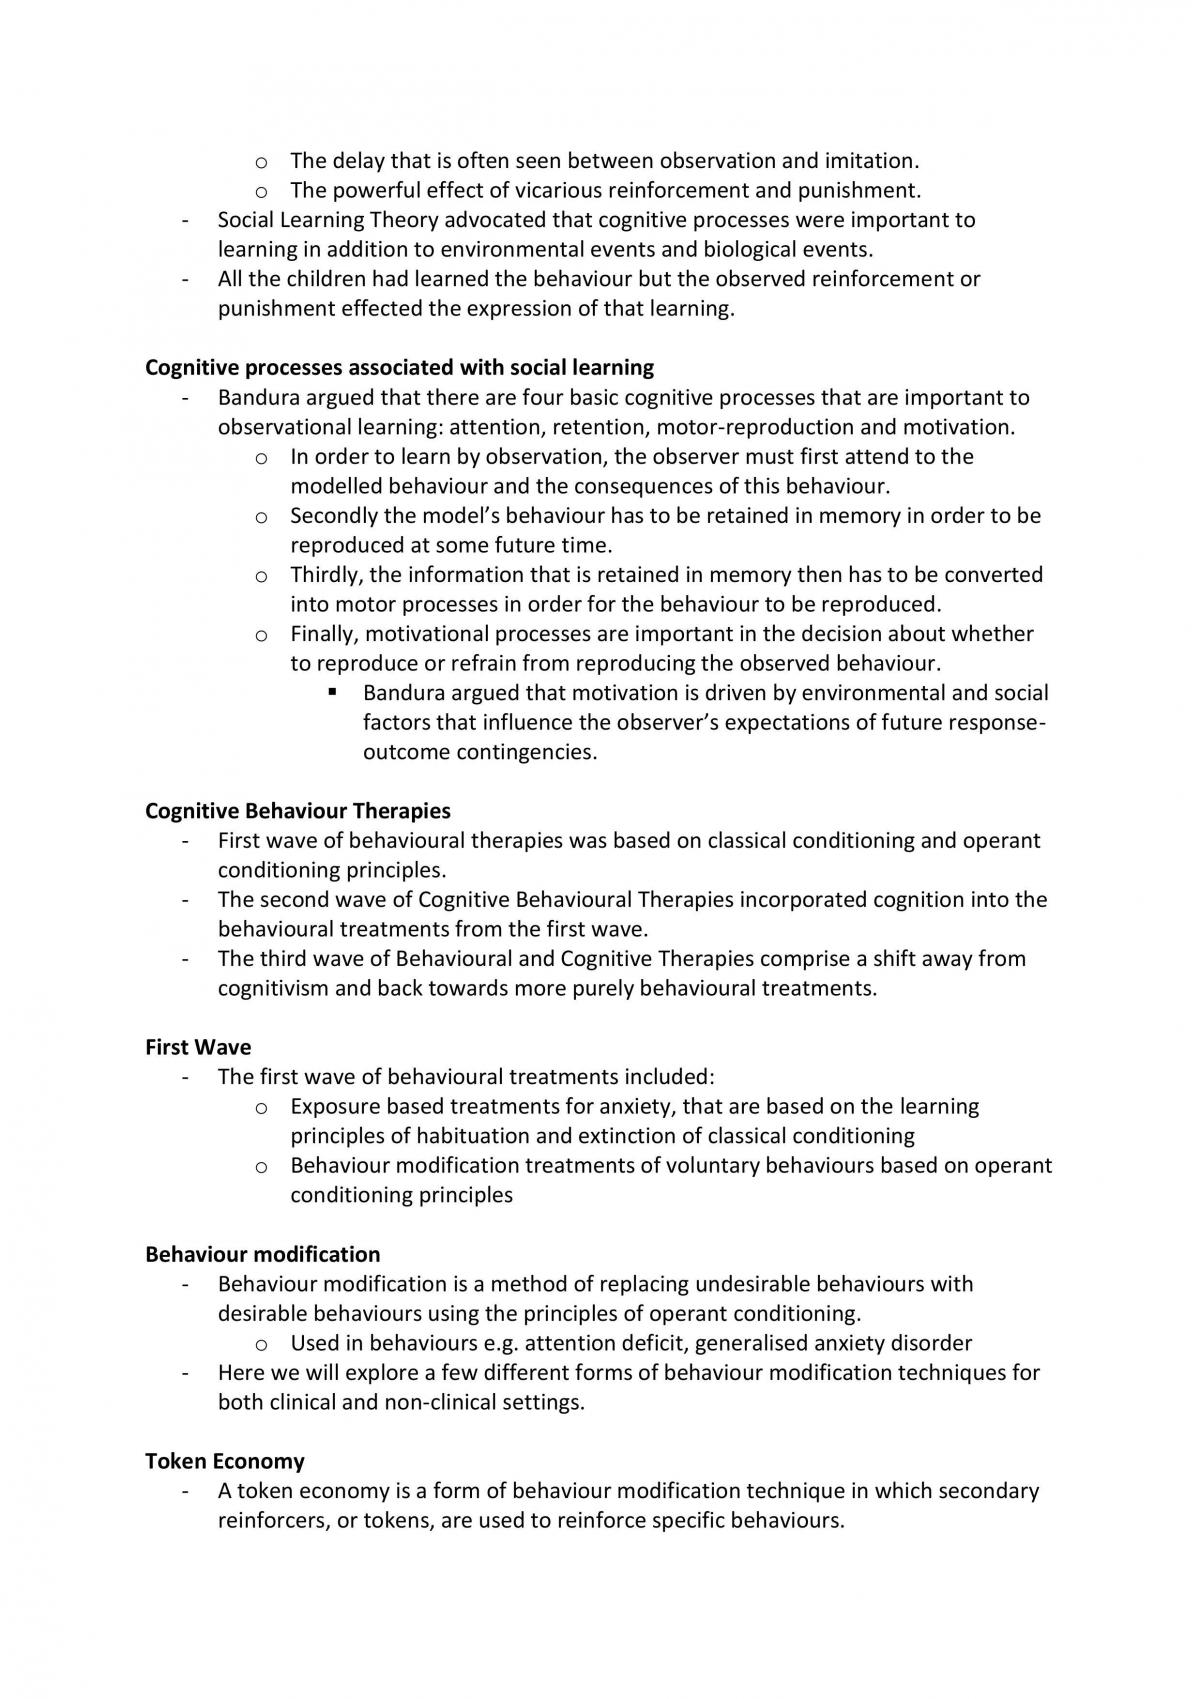 101676 Full Semester Notes - Page 45